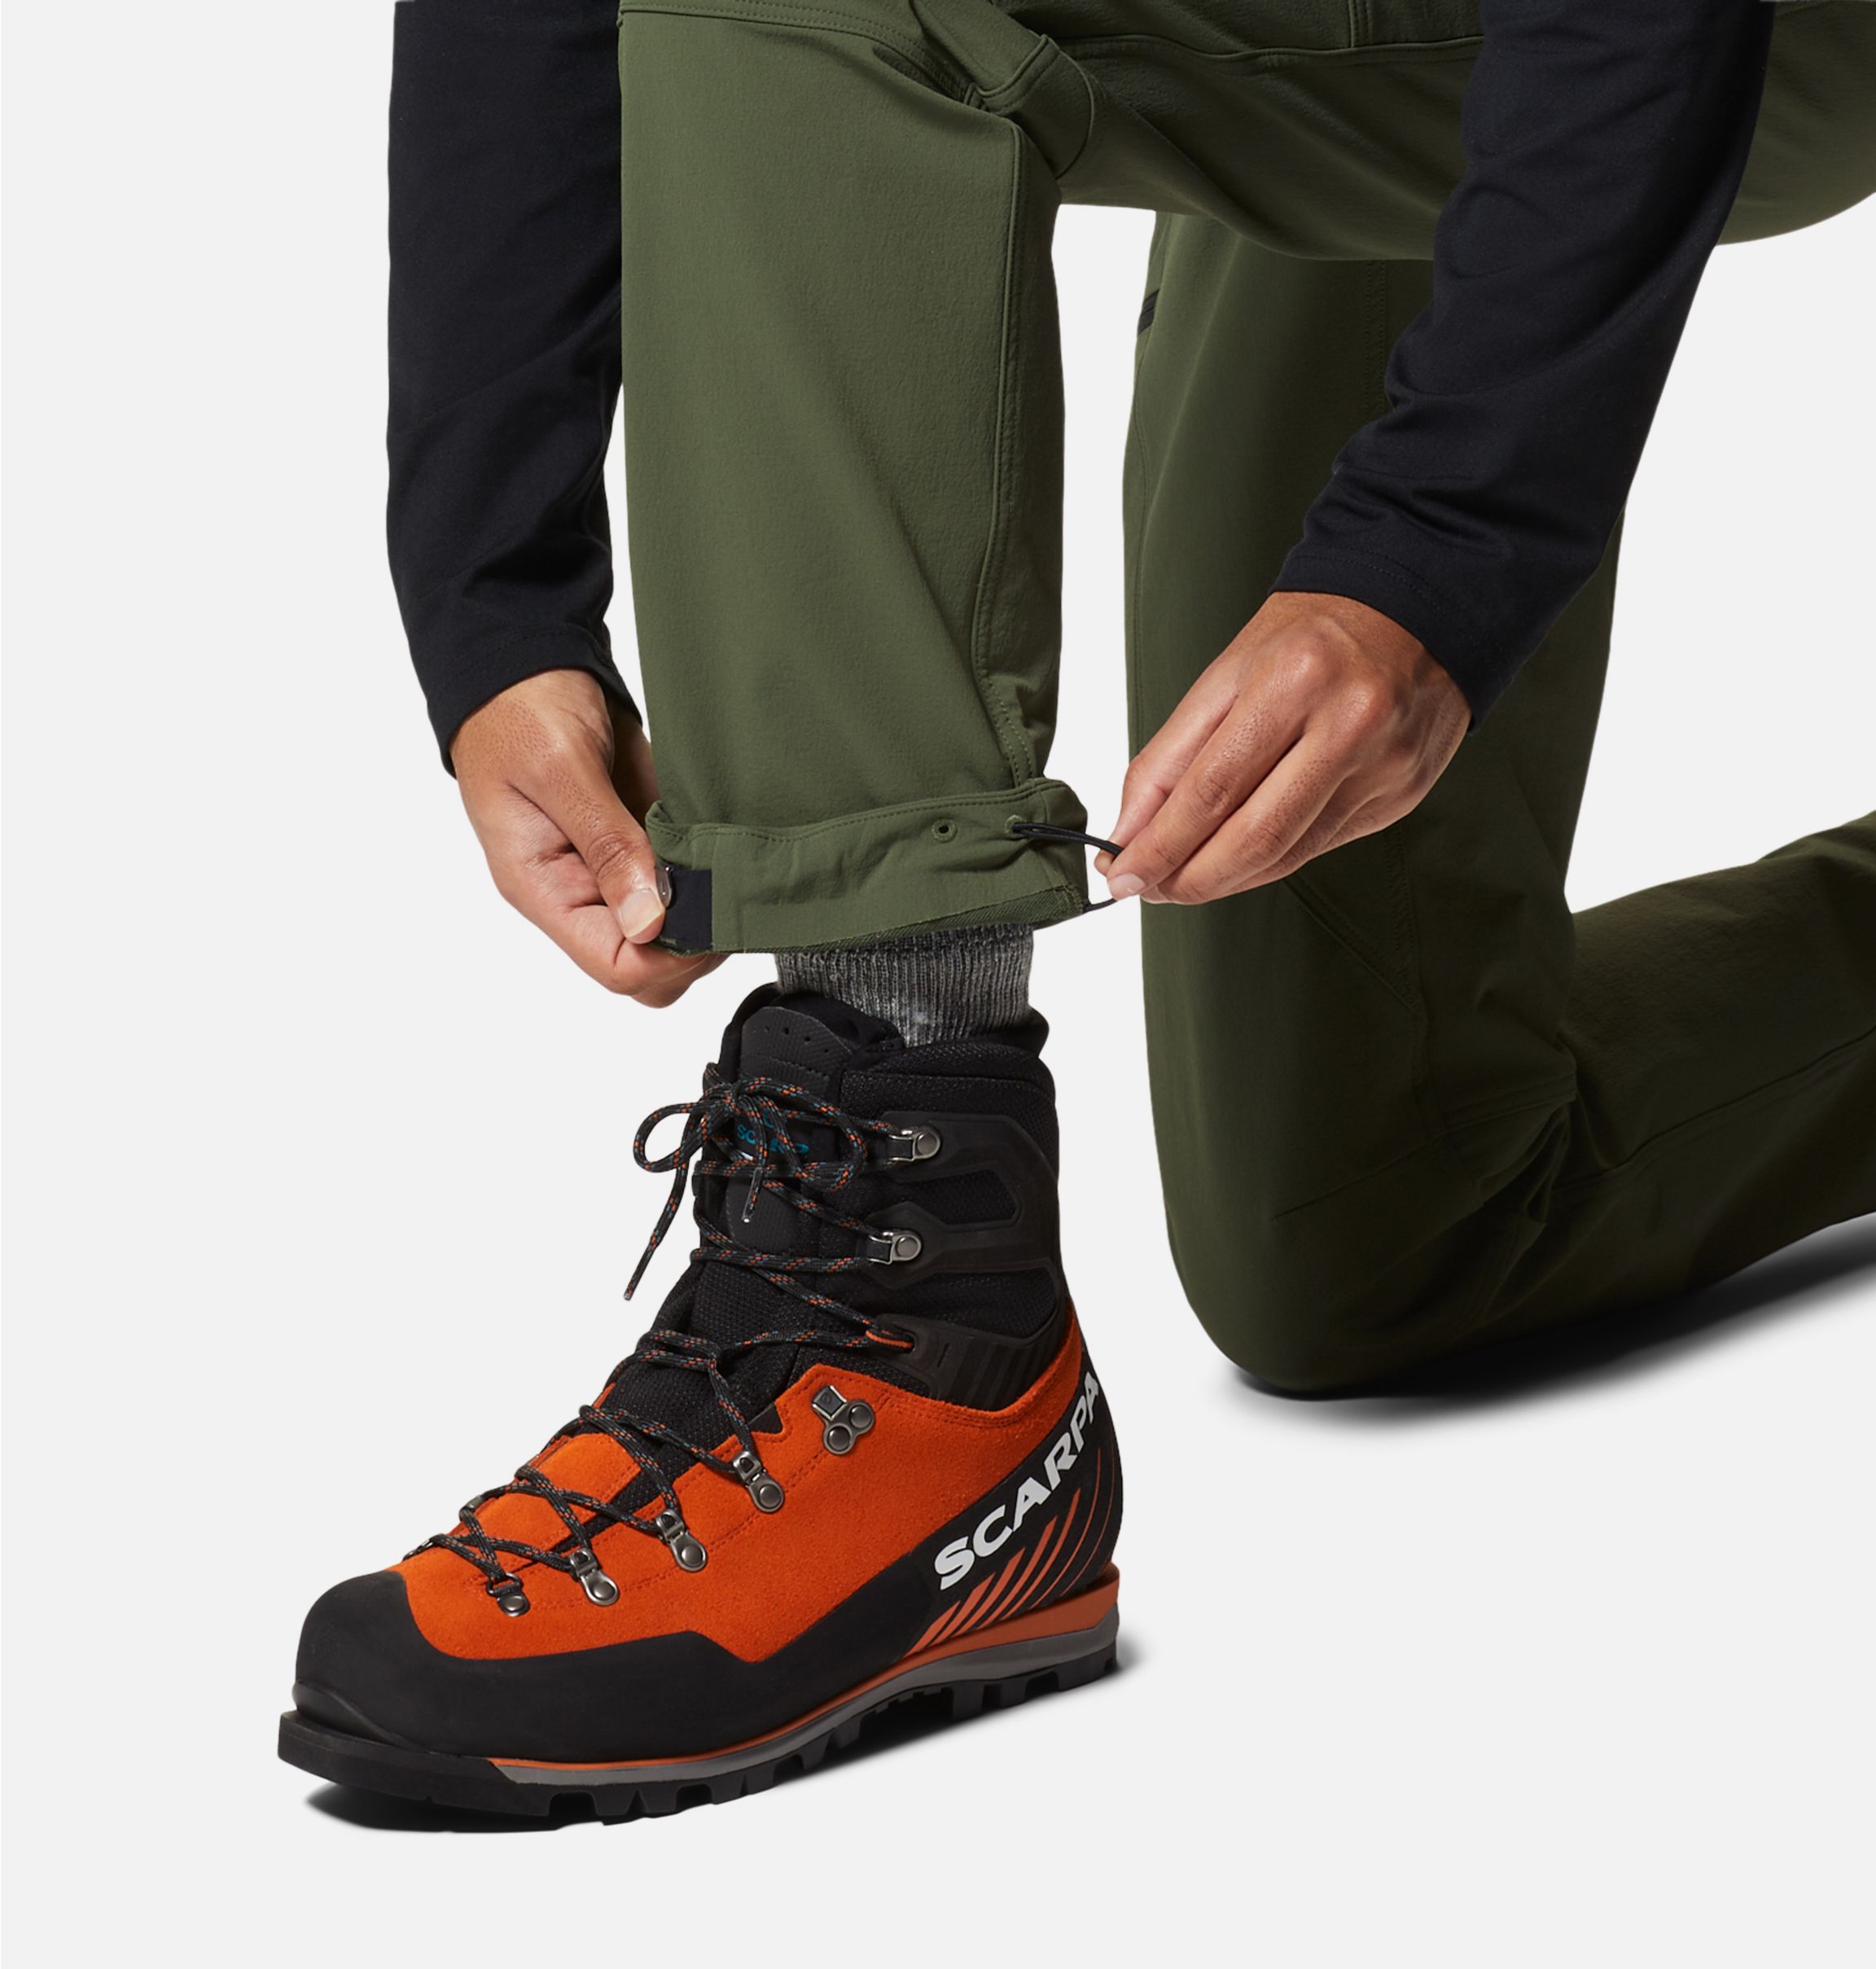 Men's Chockstone™ Alpine Pant - We're Outside Outdoor Outfitters